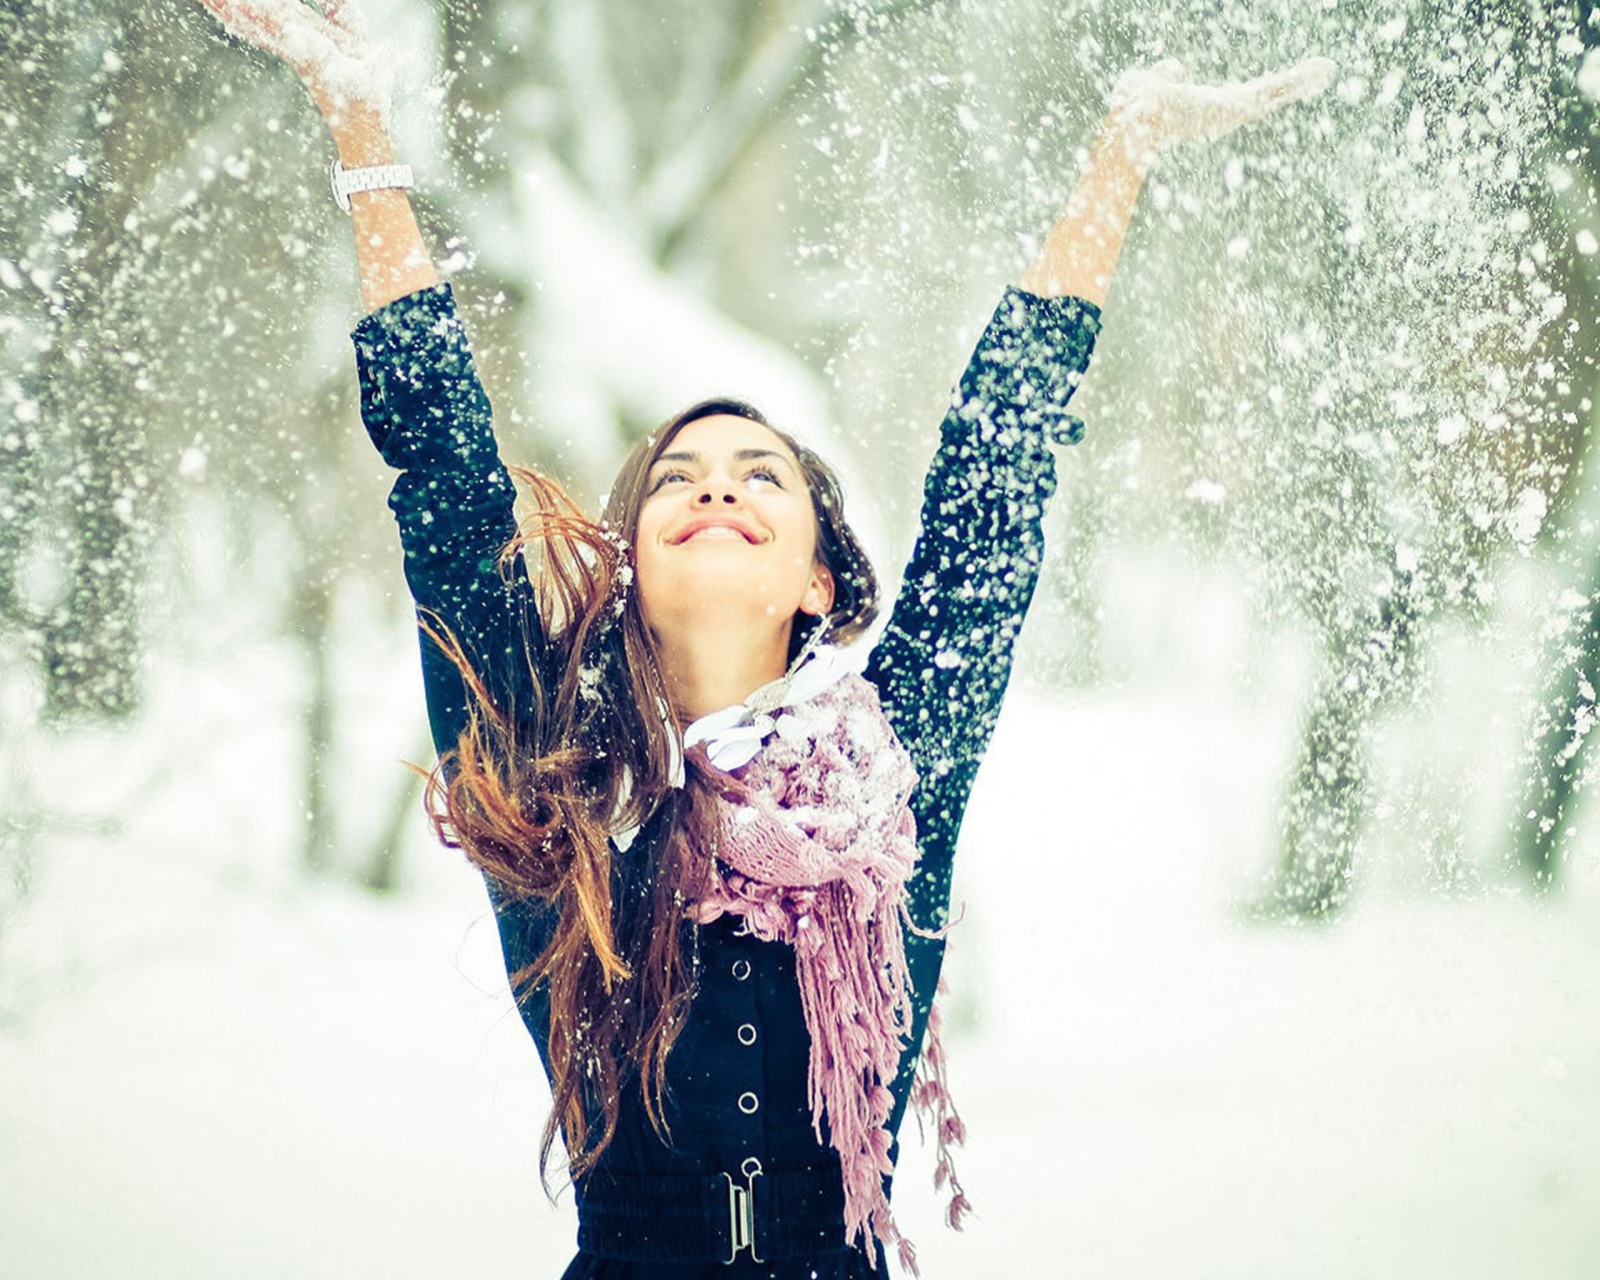 Winter, Snow And Happy Girl wallpaper 1600x1280